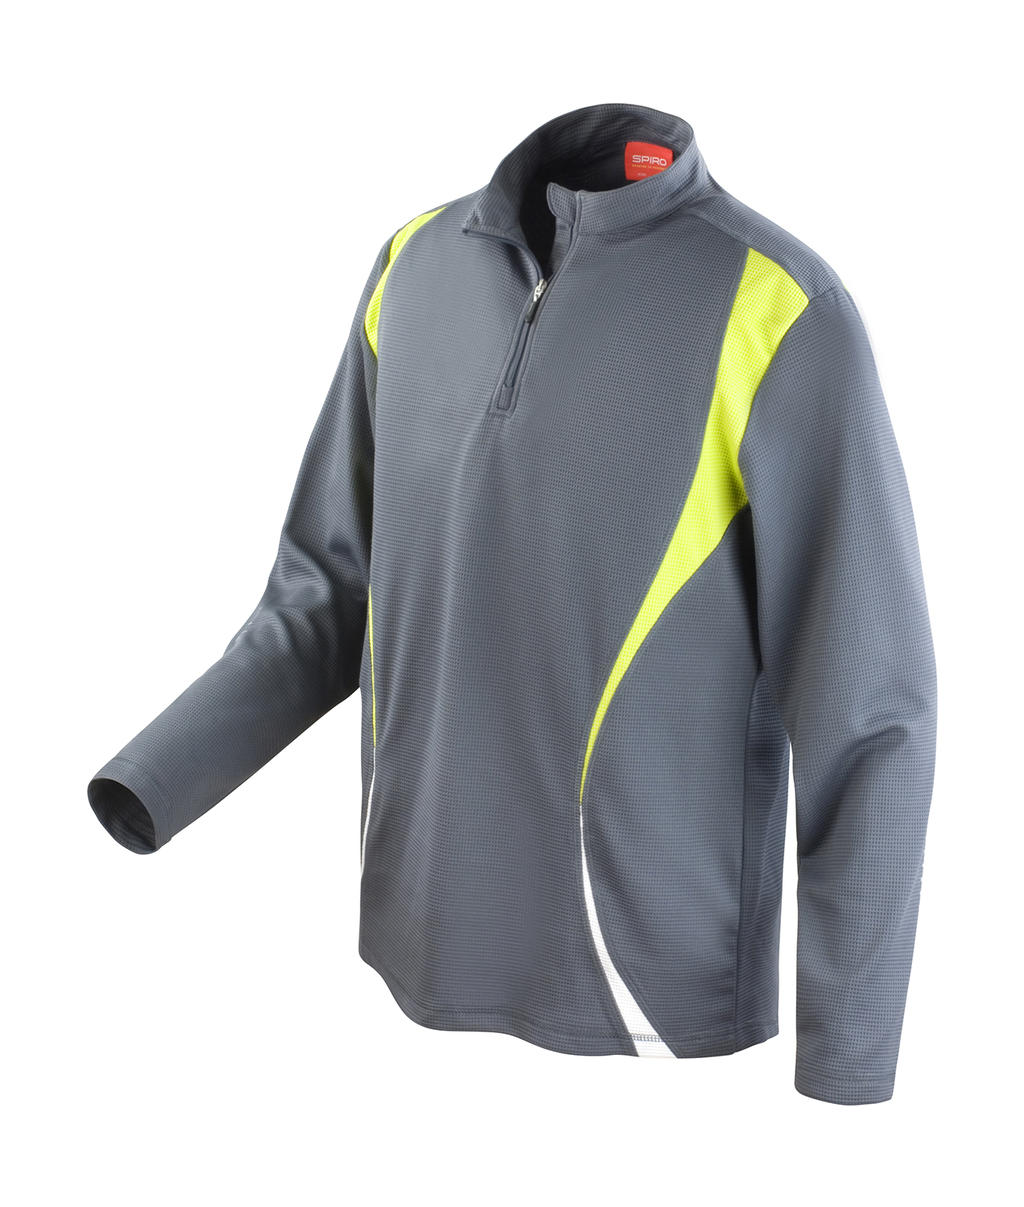  Spiro Trial Training Top in Farbe Charcoal/Lime/White